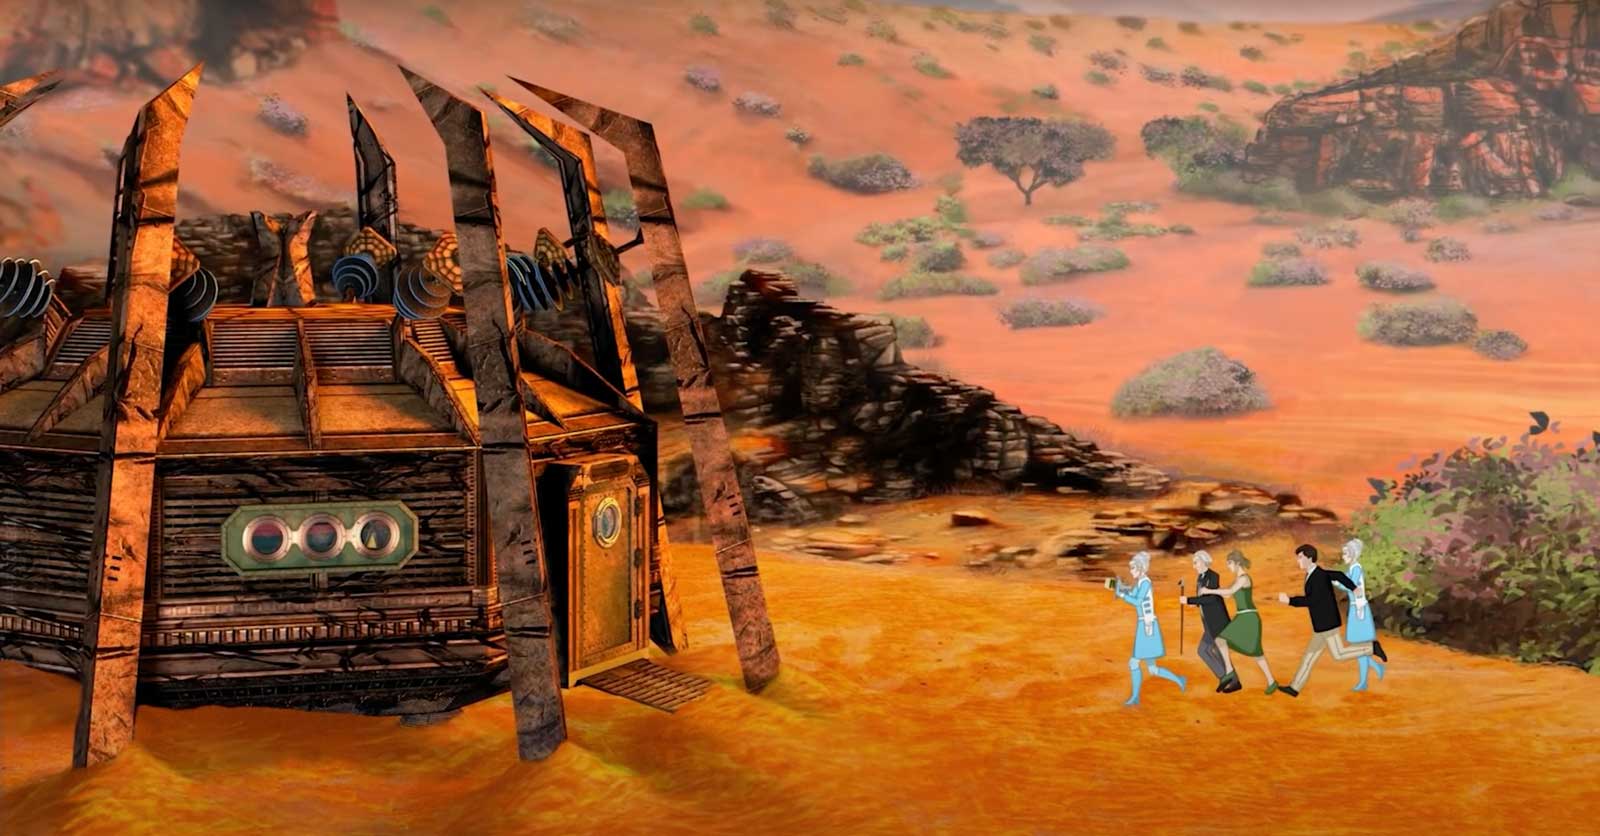 Screencap from Galaxy 4 (animated): In an orange scrubland landscape, the Doctor, Vicki, Steven, and two Drahvins (women in blue outfits) run towards a decrepit landed spaceship.